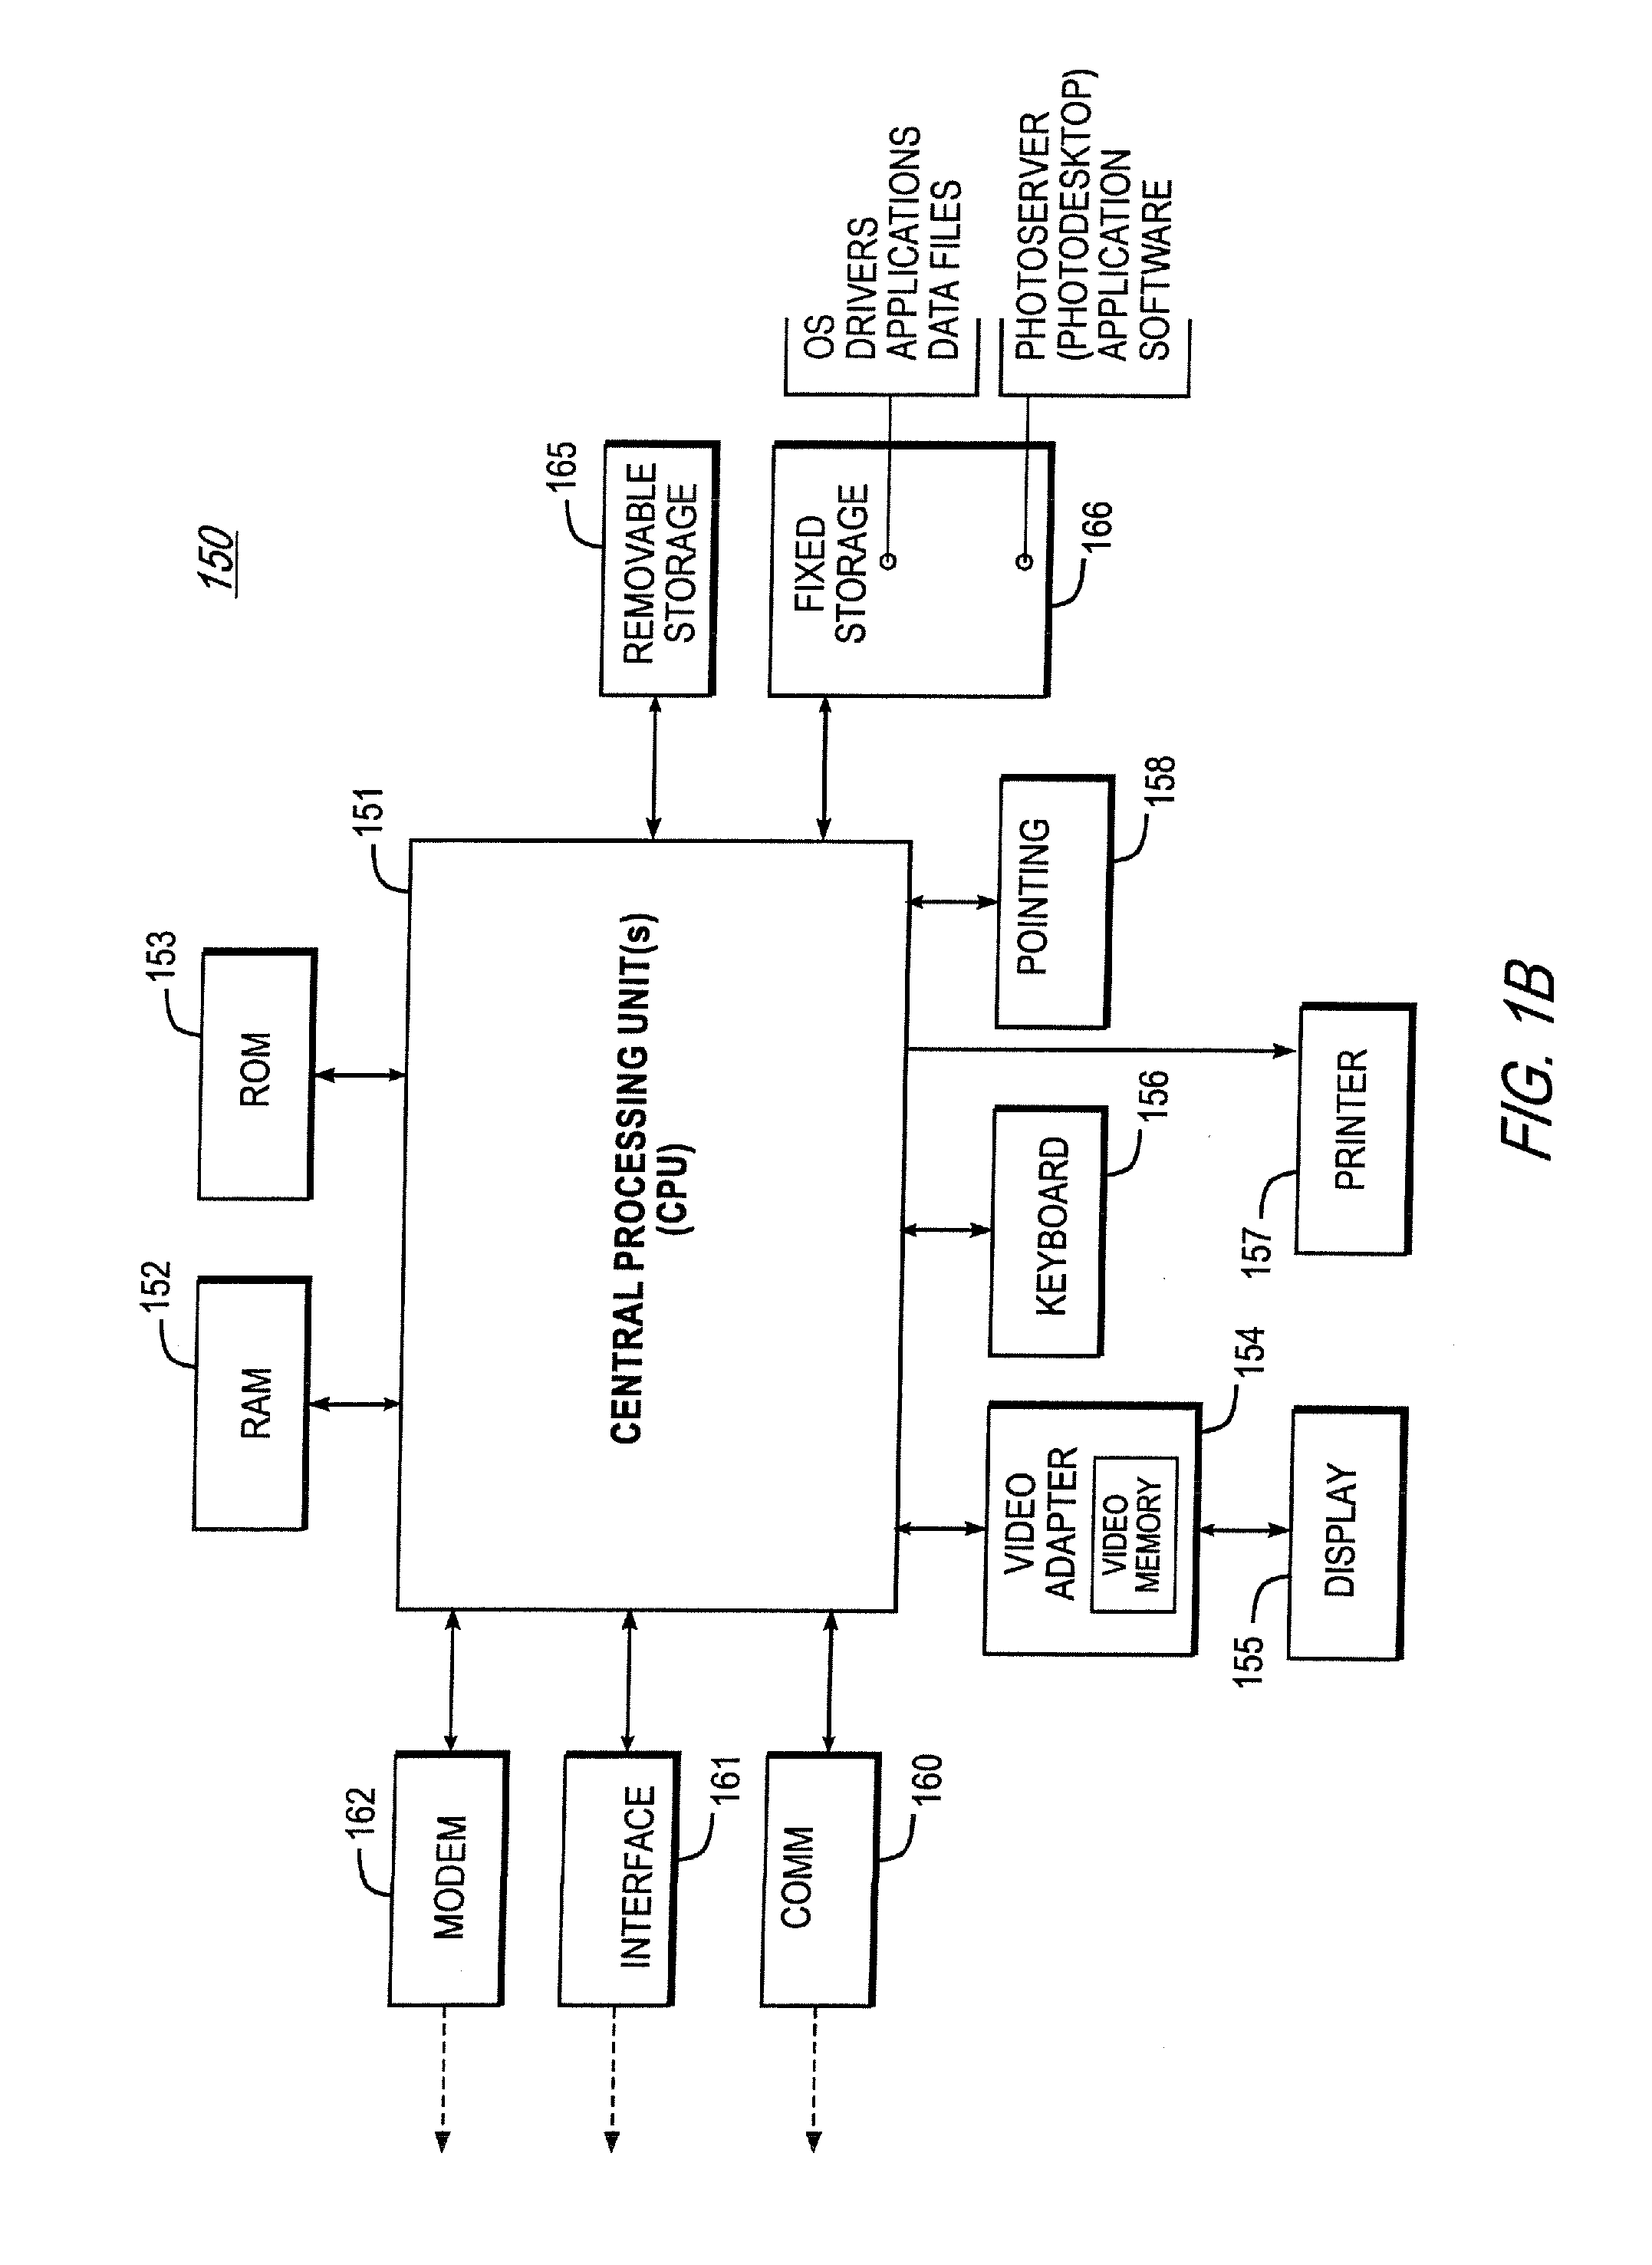 Digital Camera Device Providing Improved Methodology for Rapidly Taking Successive Pictures